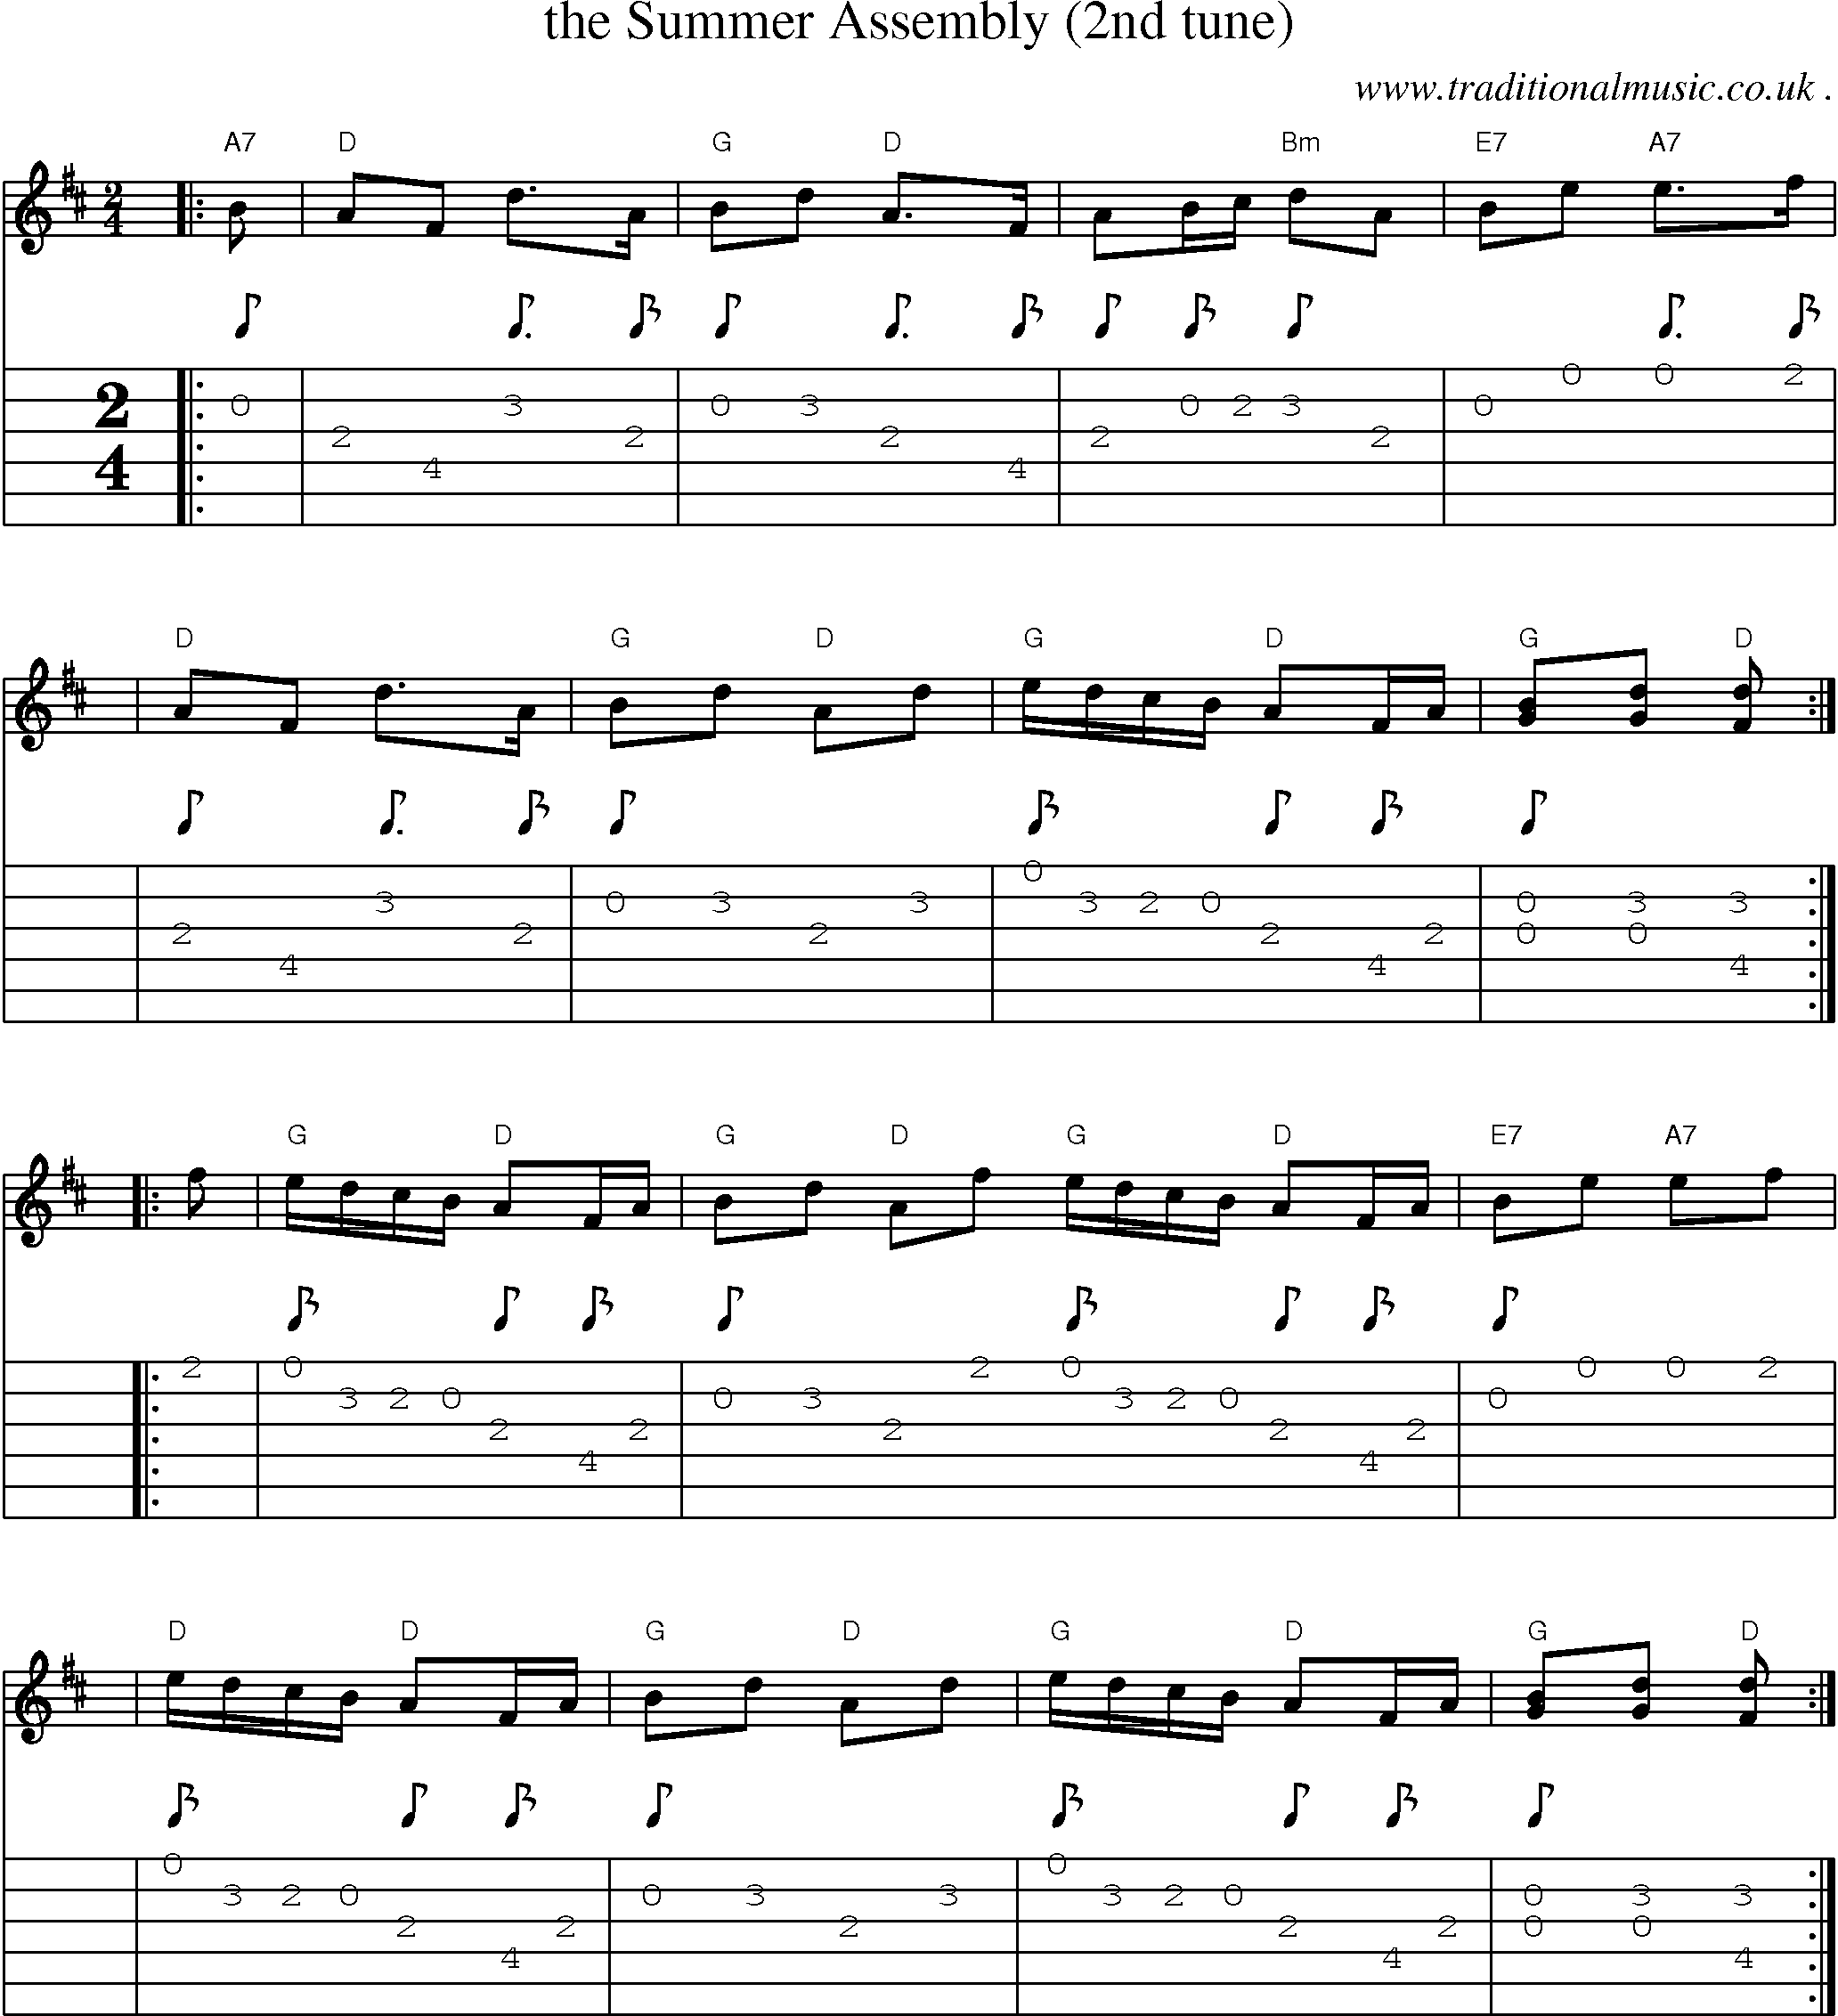 Sheet-music  score, Chords and Guitar Tabs for The Summer Assembly 2nd Tune